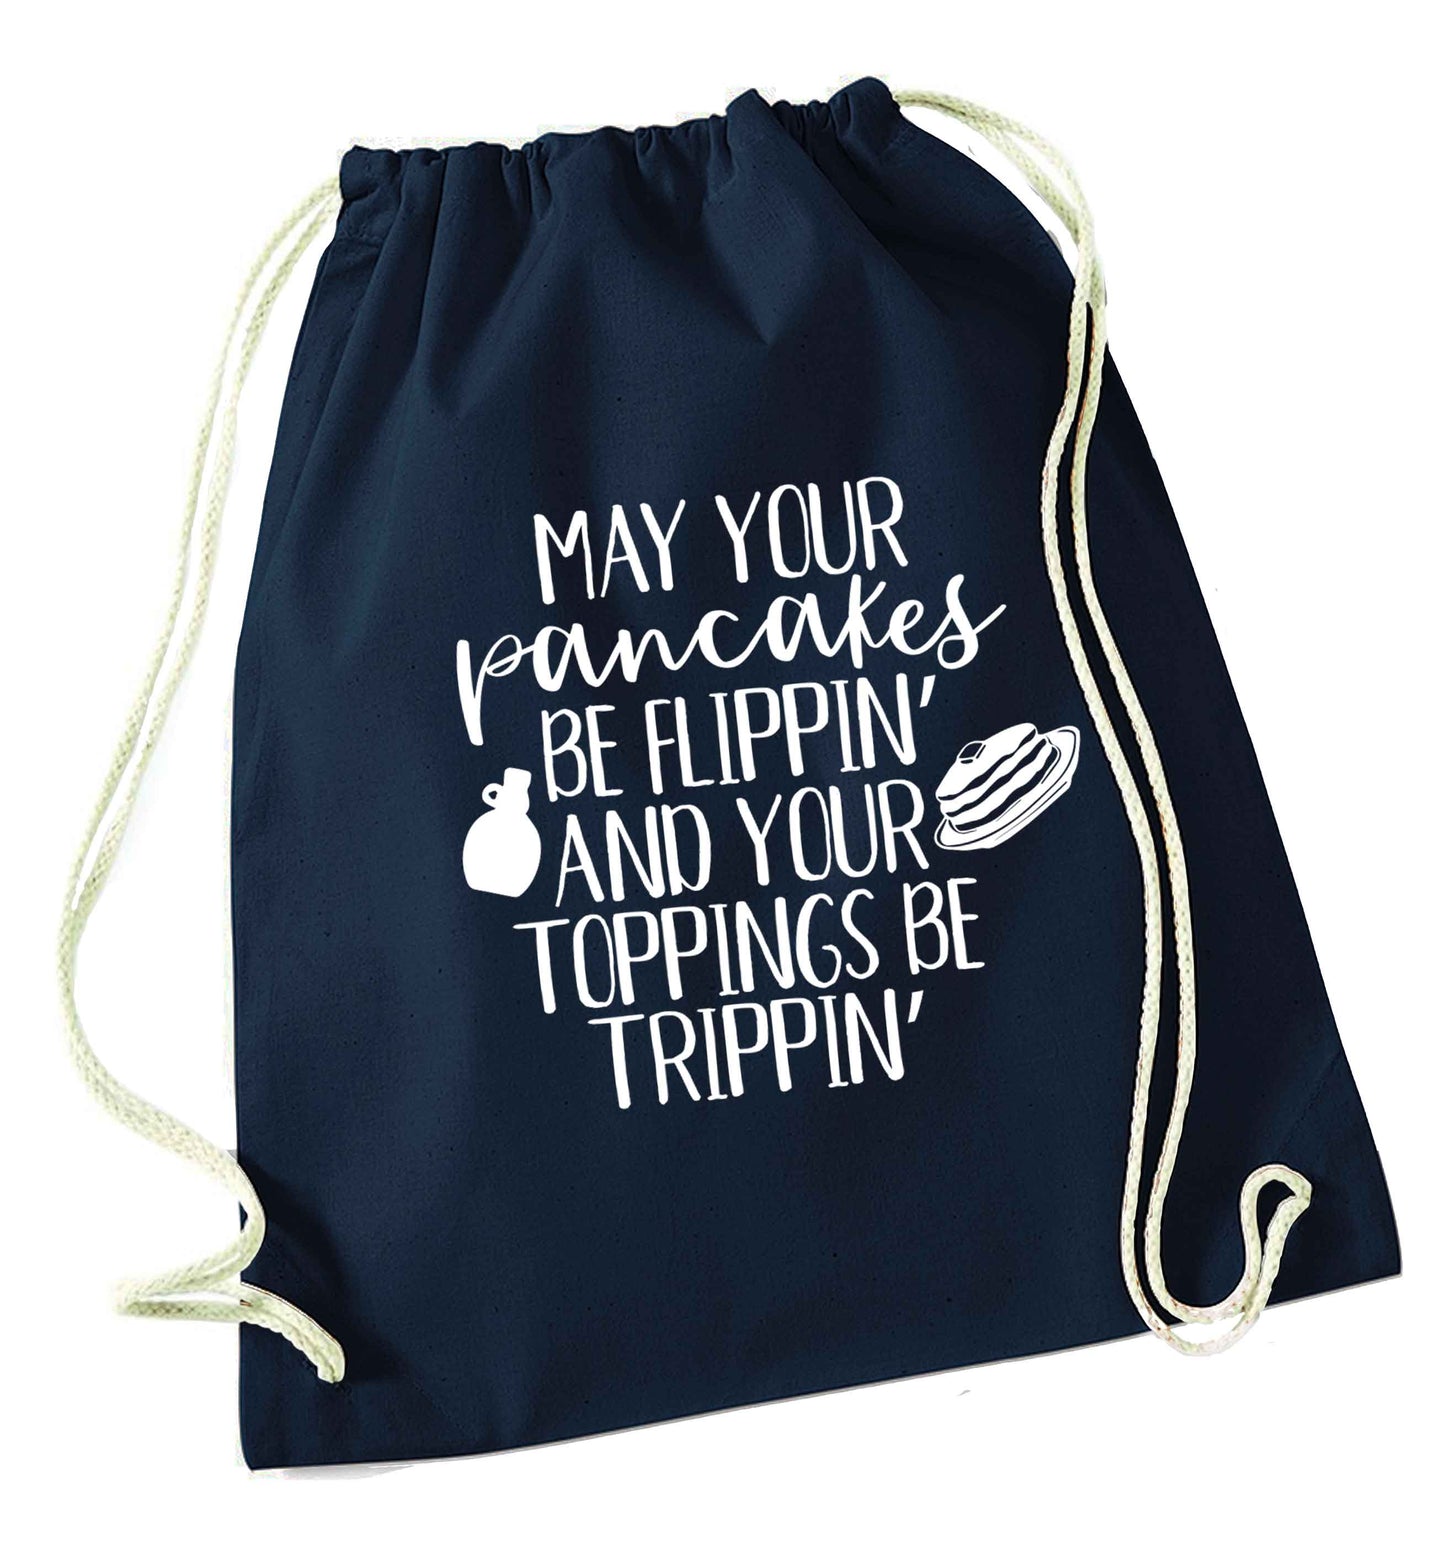 May your pancakes be flippin' and your toppings be trippin' navy drawstring bag